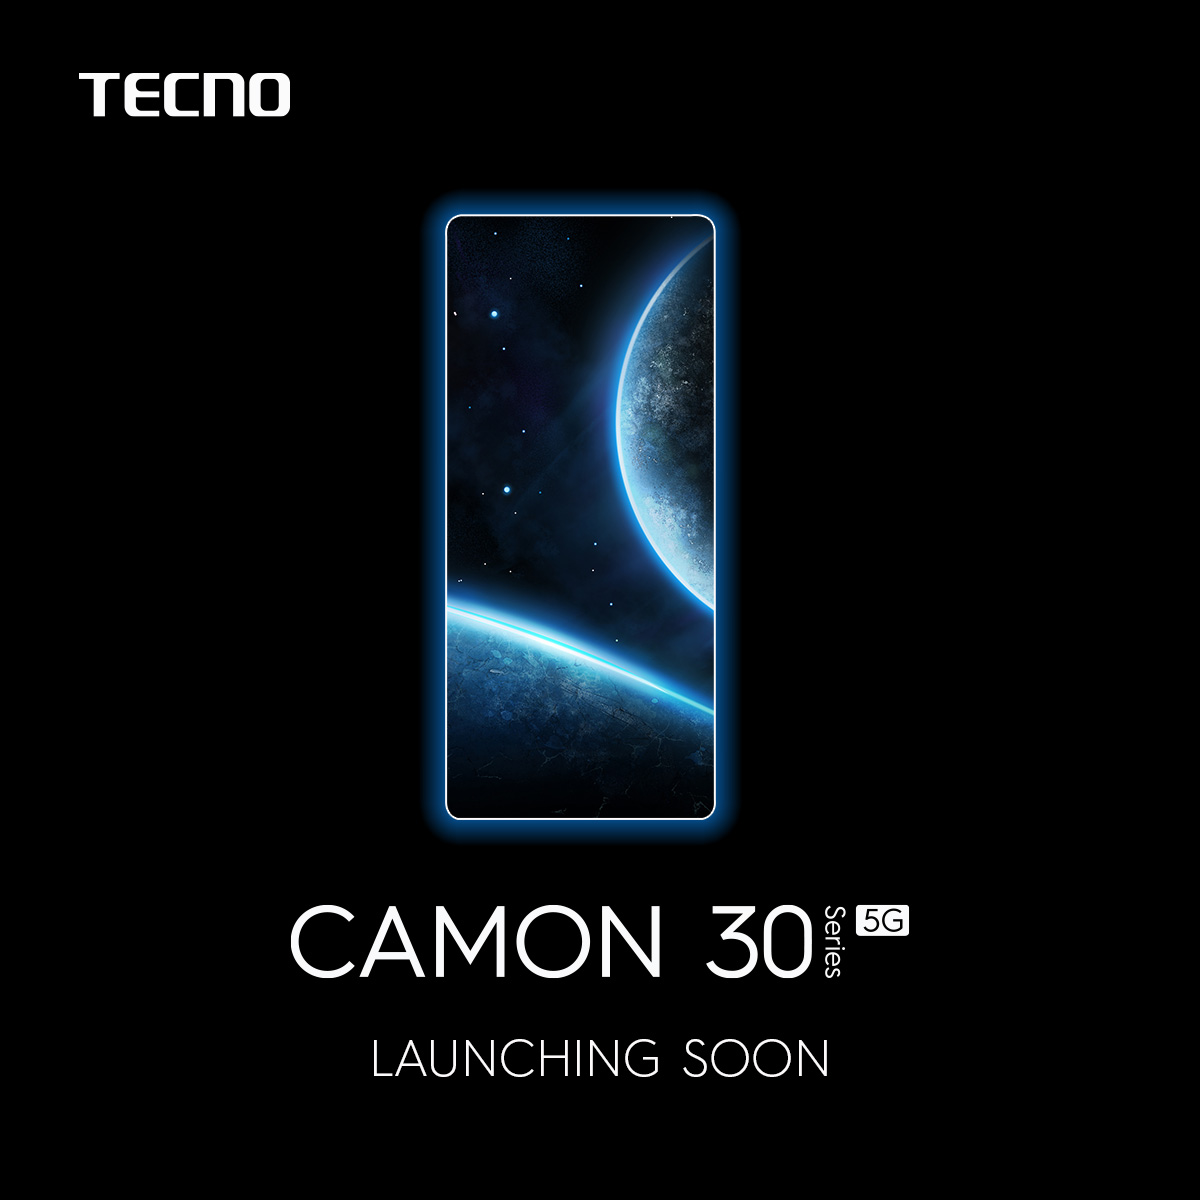 Expand your memories, expand your world. I have upgraded storage that will hold your precious moments! #CAMON30SERIES #CAMON30AIPhone